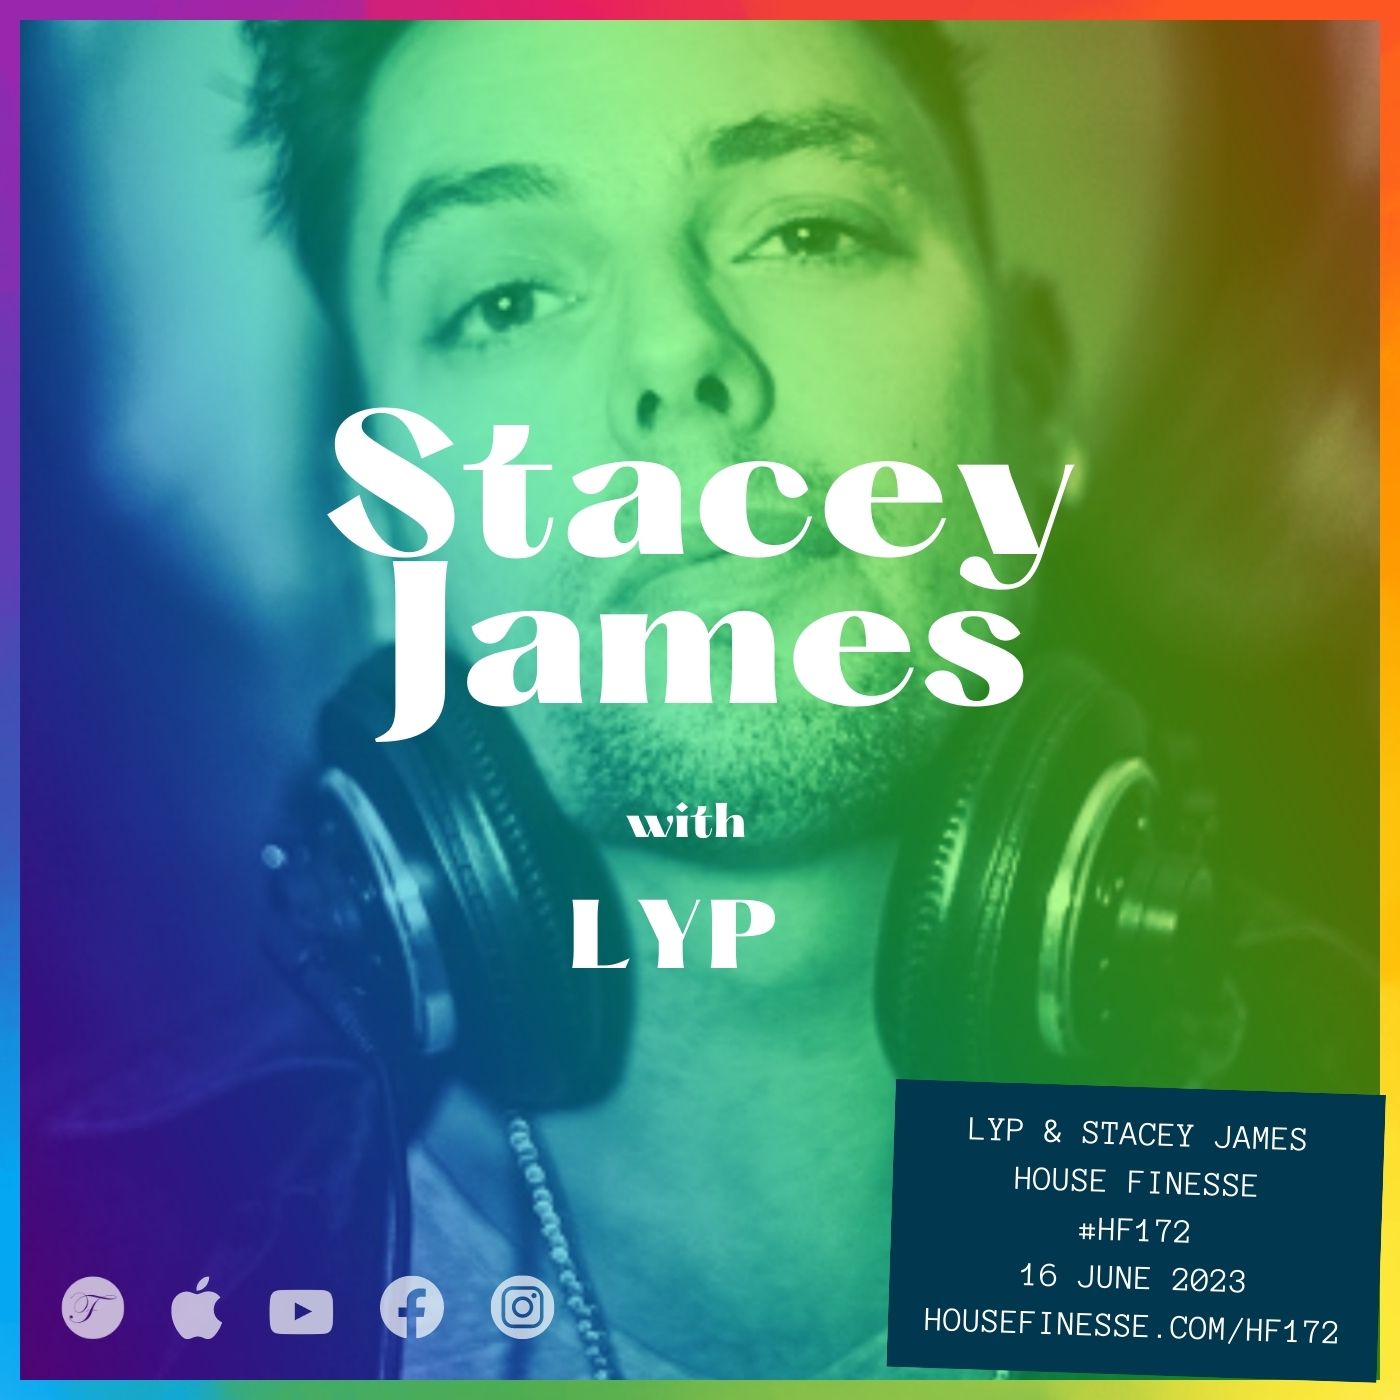 Stacey James with LYP